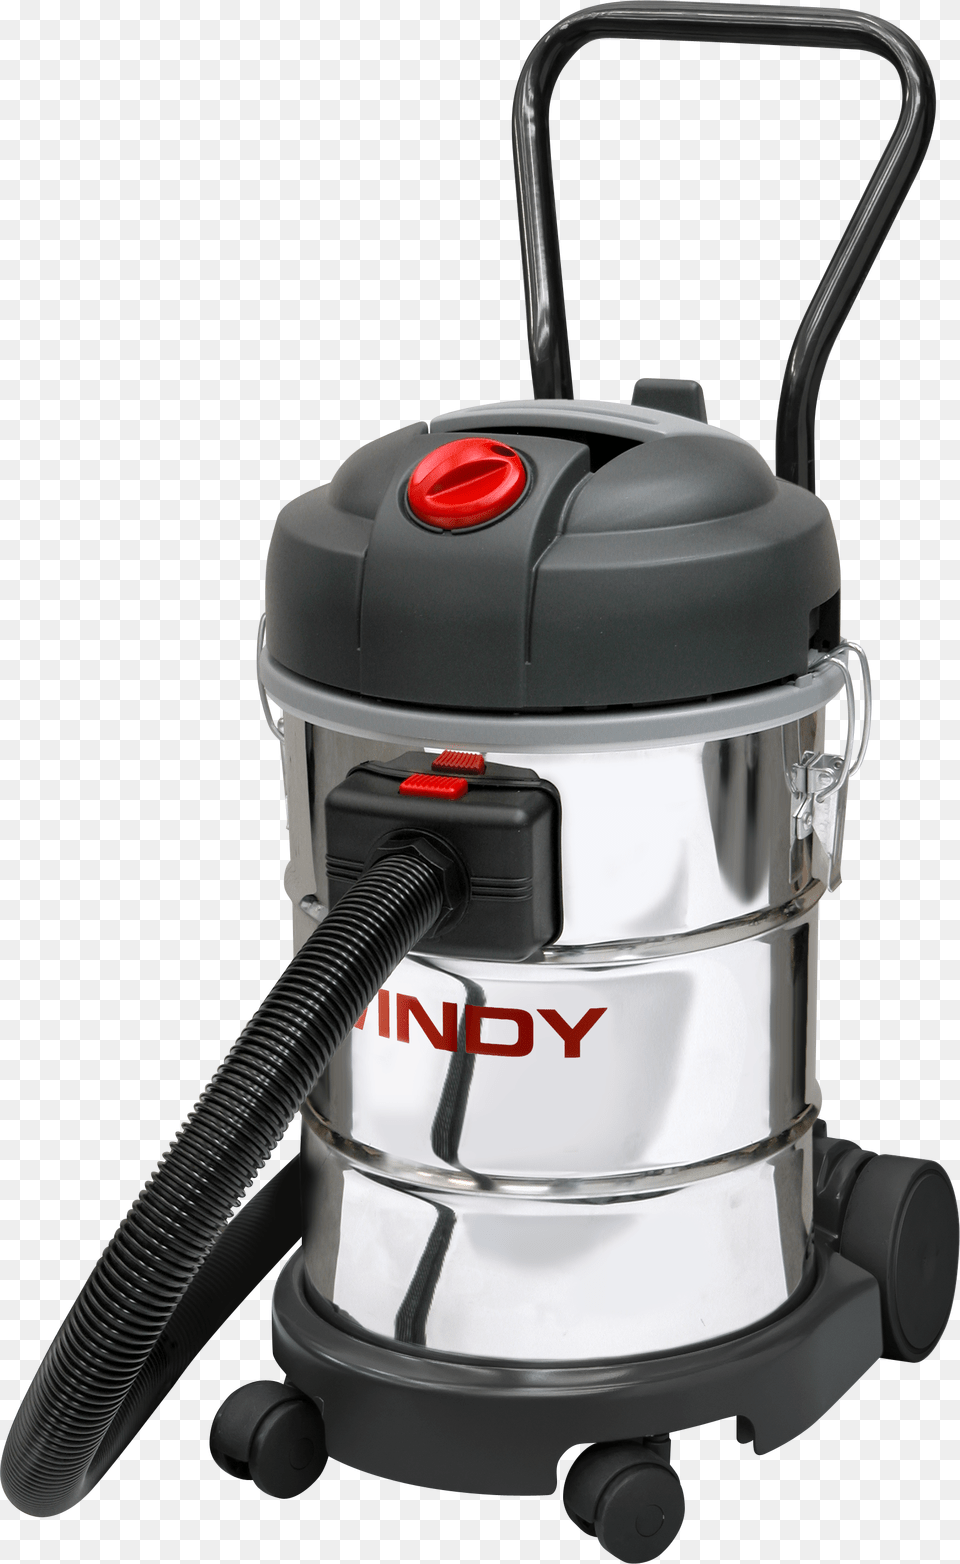 Windy 130 If, Appliance, Device, Electrical Device, Vacuum Cleaner Png Image